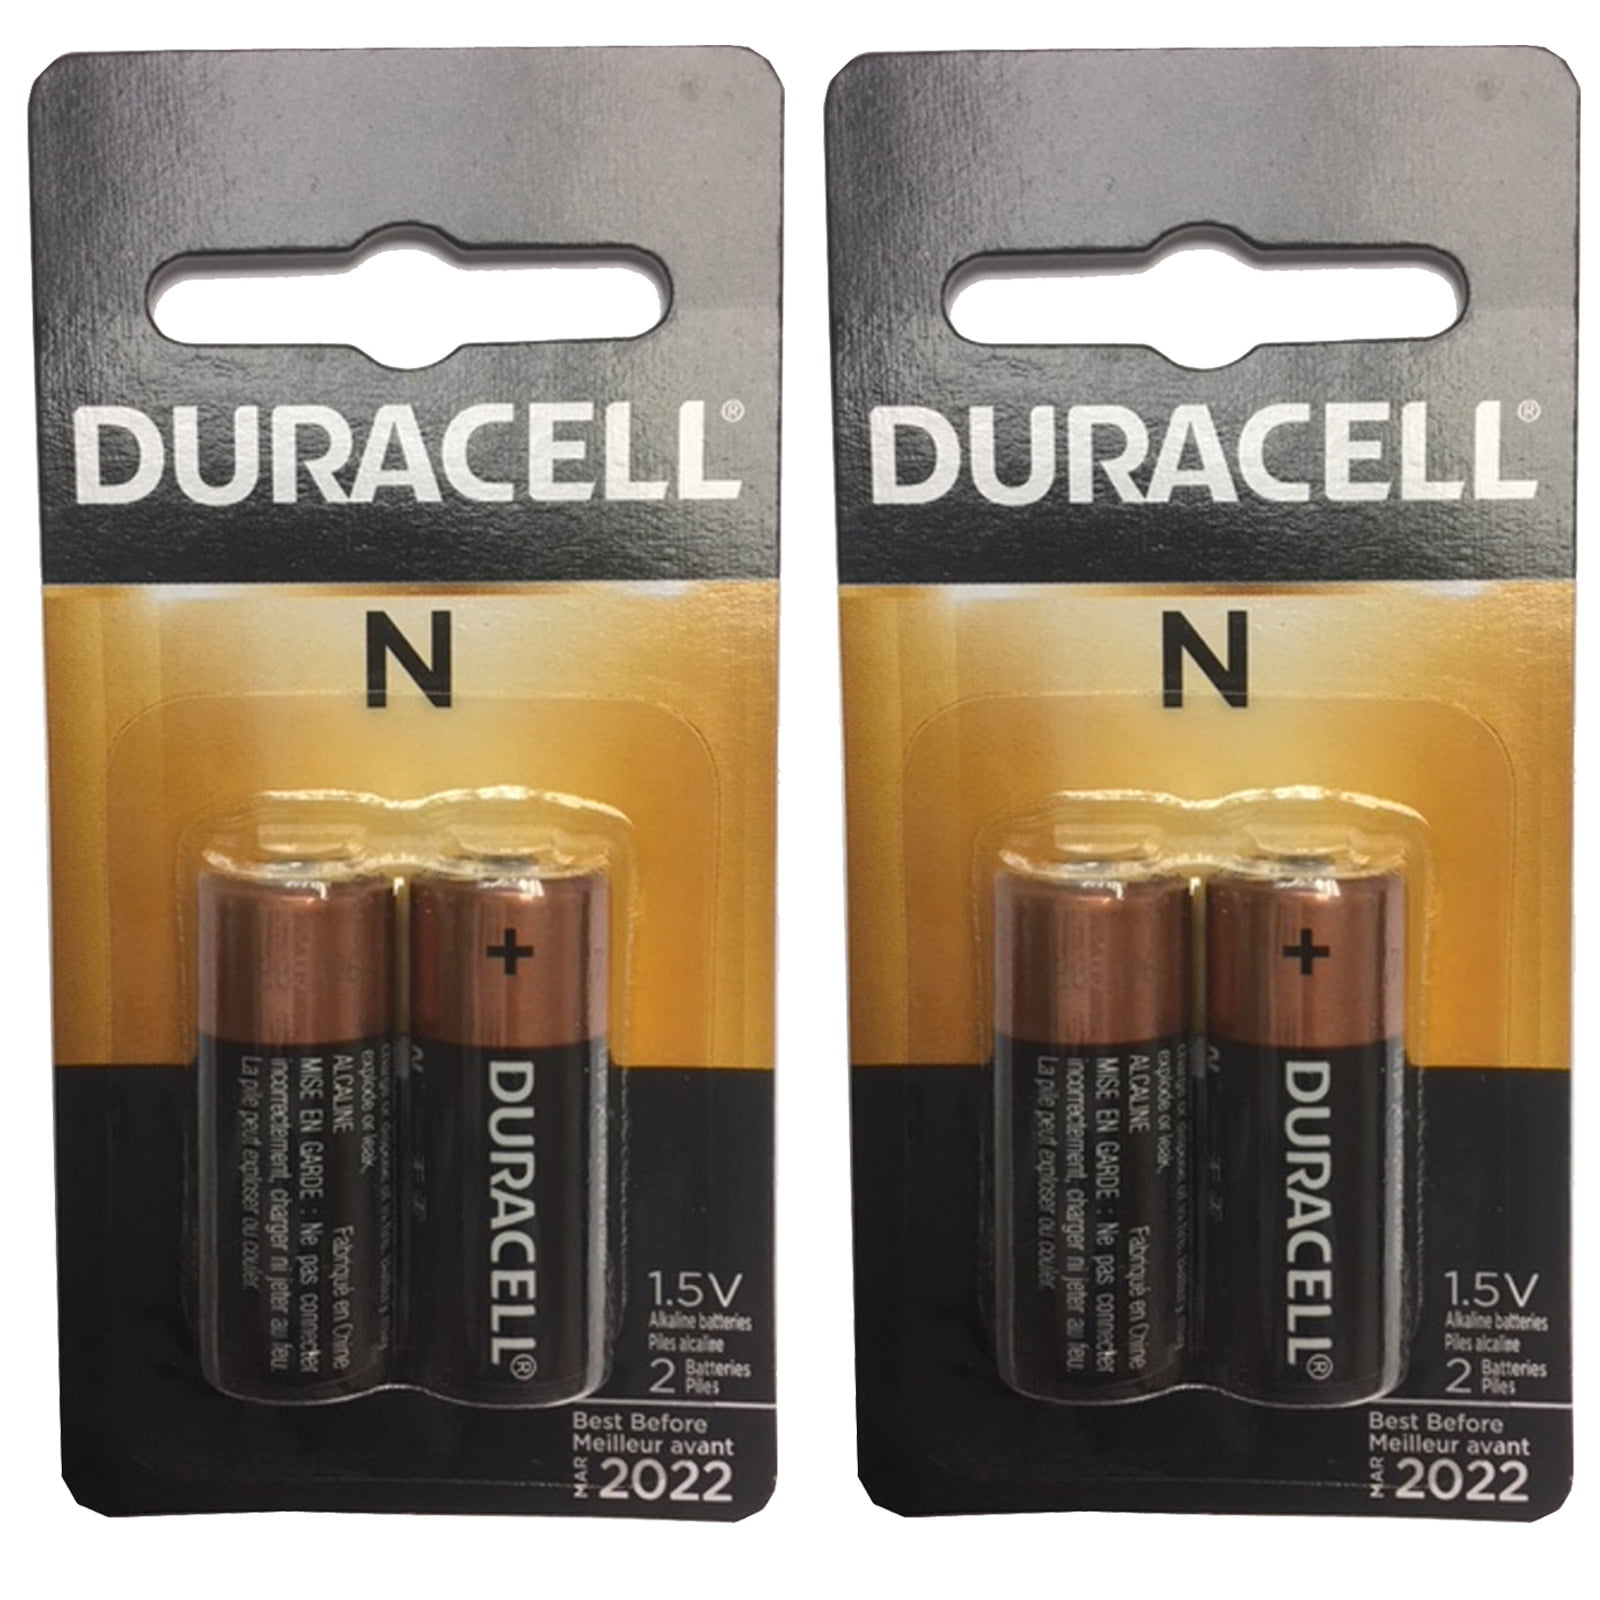 2x Duracell 2pk 1.5V N Size Alkaline Battery MED Devices Child Locators GPS